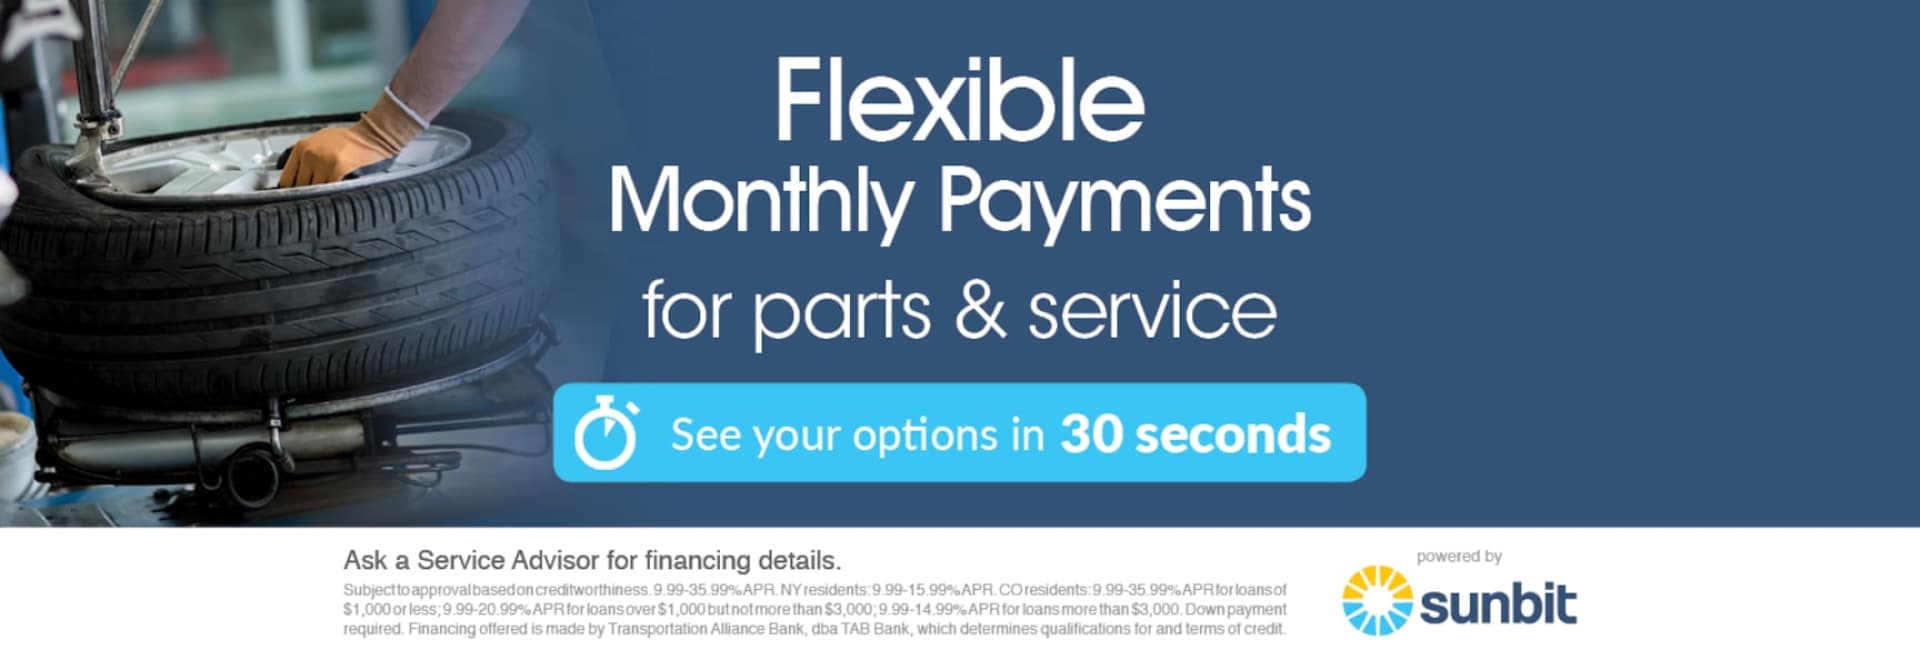 Flexible Monthly Payments for Parts and Service